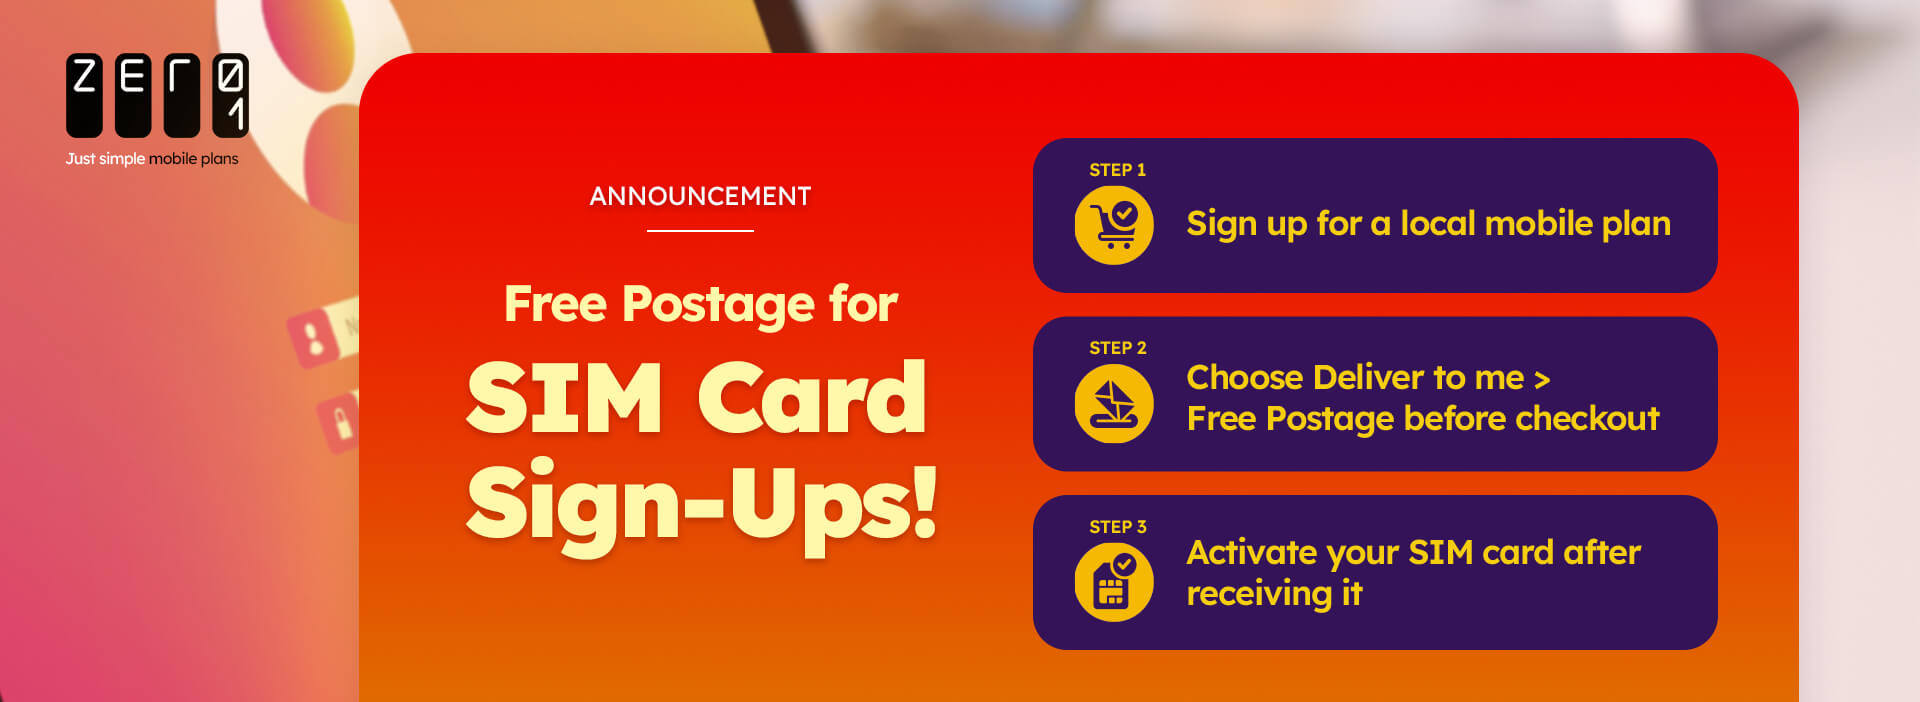 Free Postage for SIM Card Sign-Ups